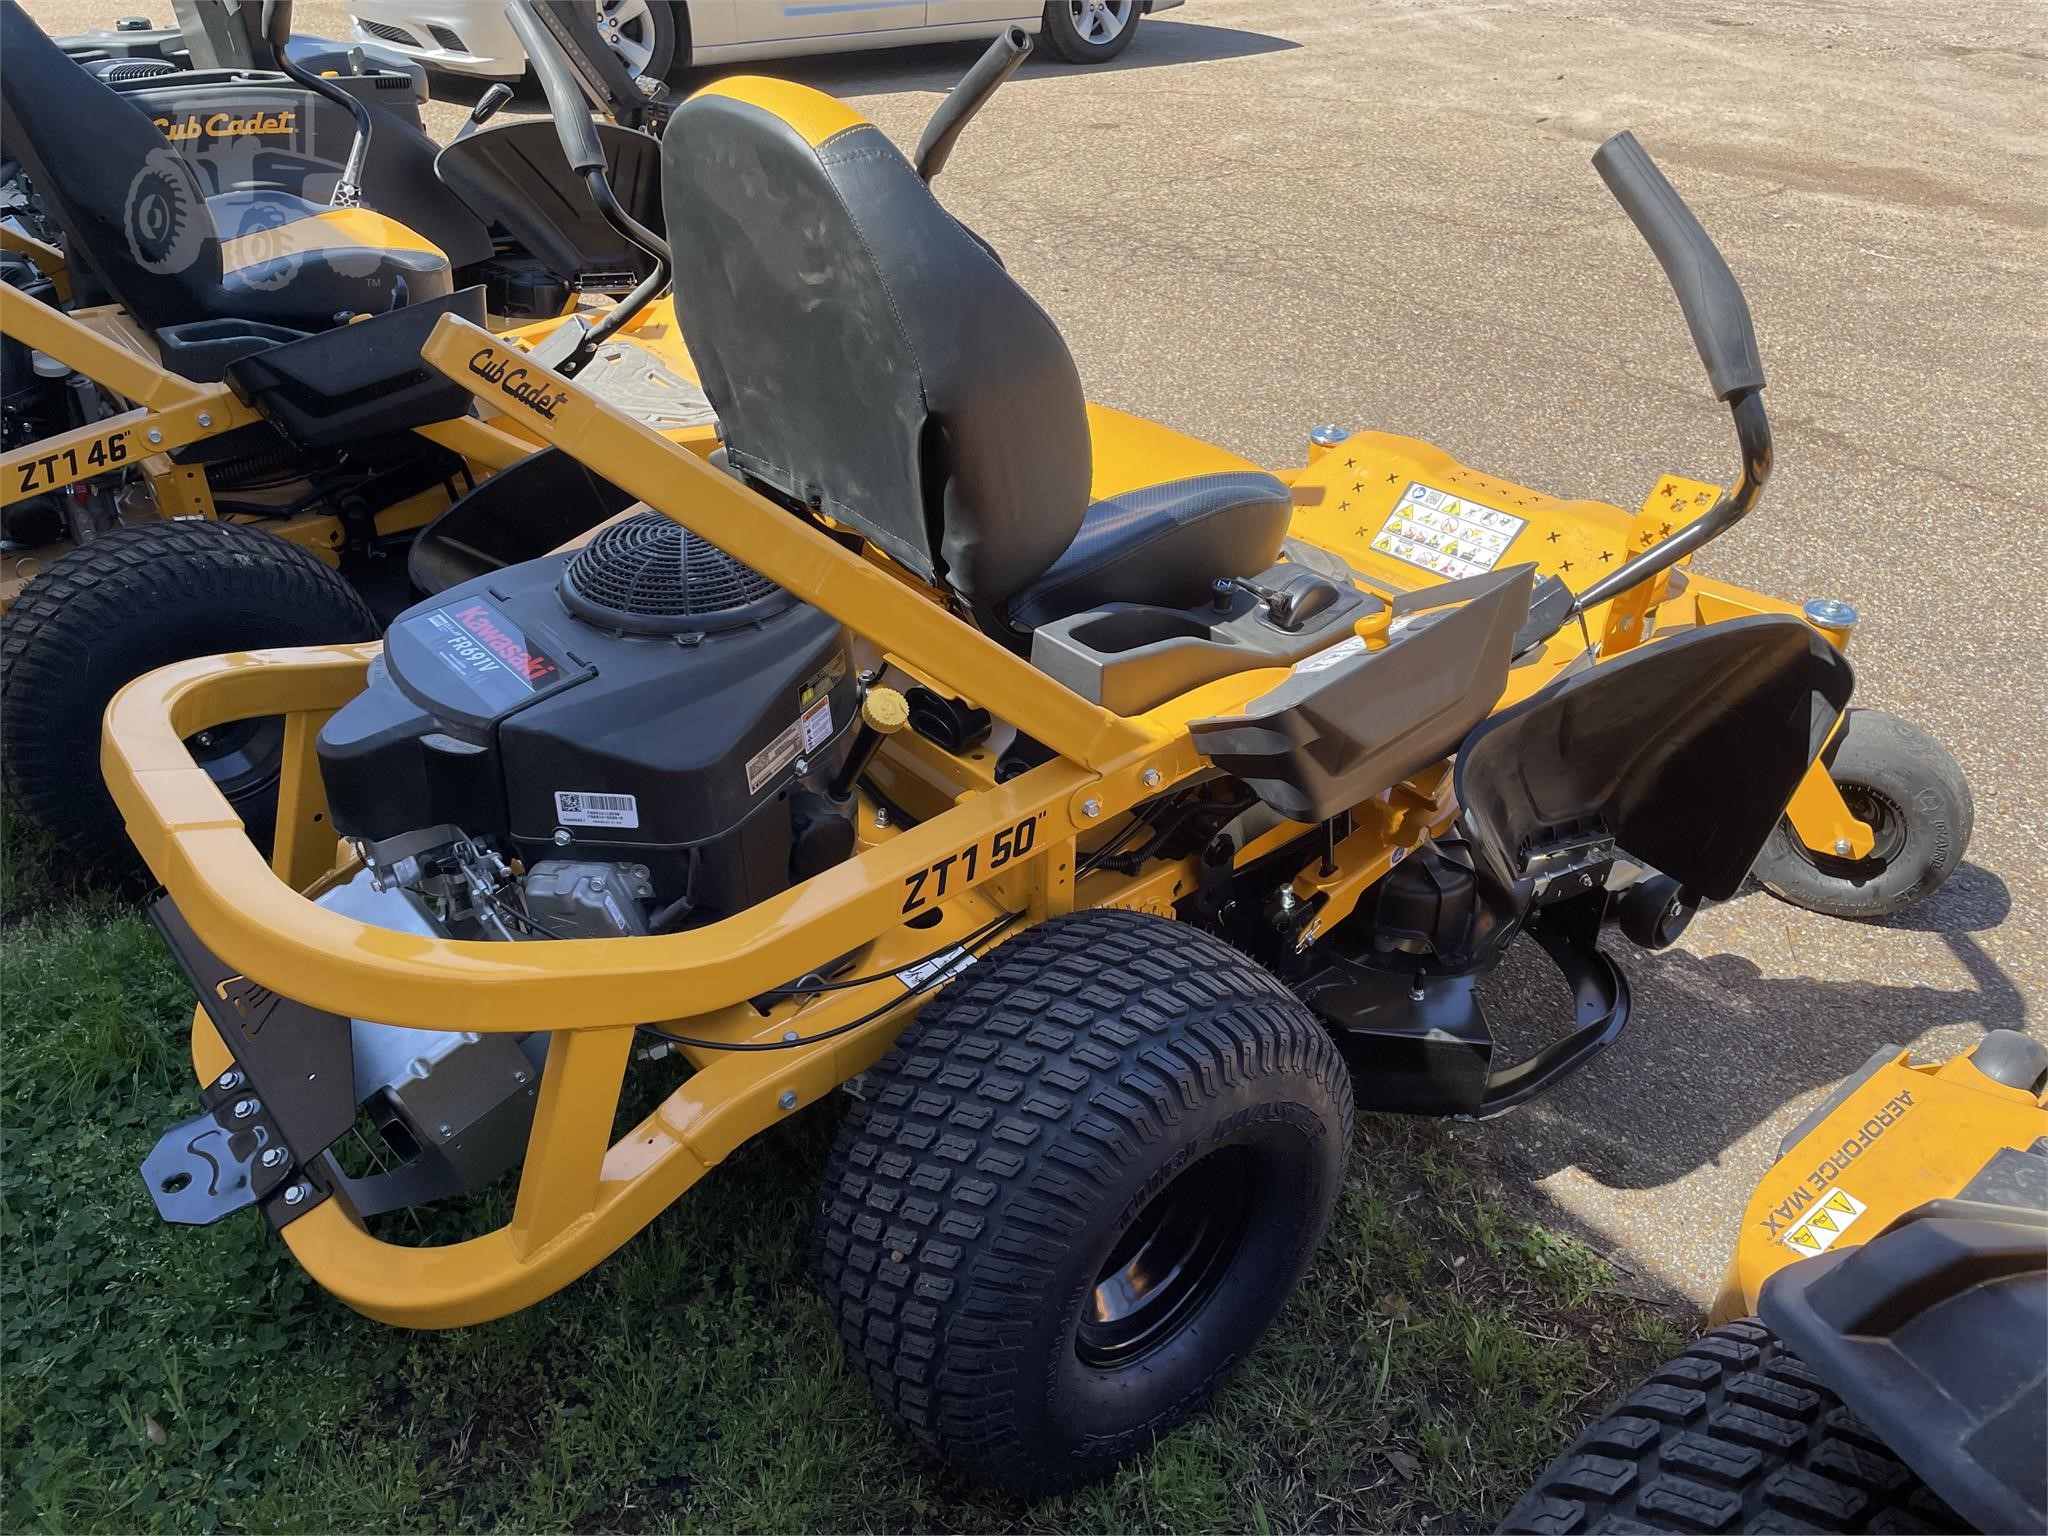 CUB CADET ULTIMA ZT1 50 For Sale In Henning, Tennessee